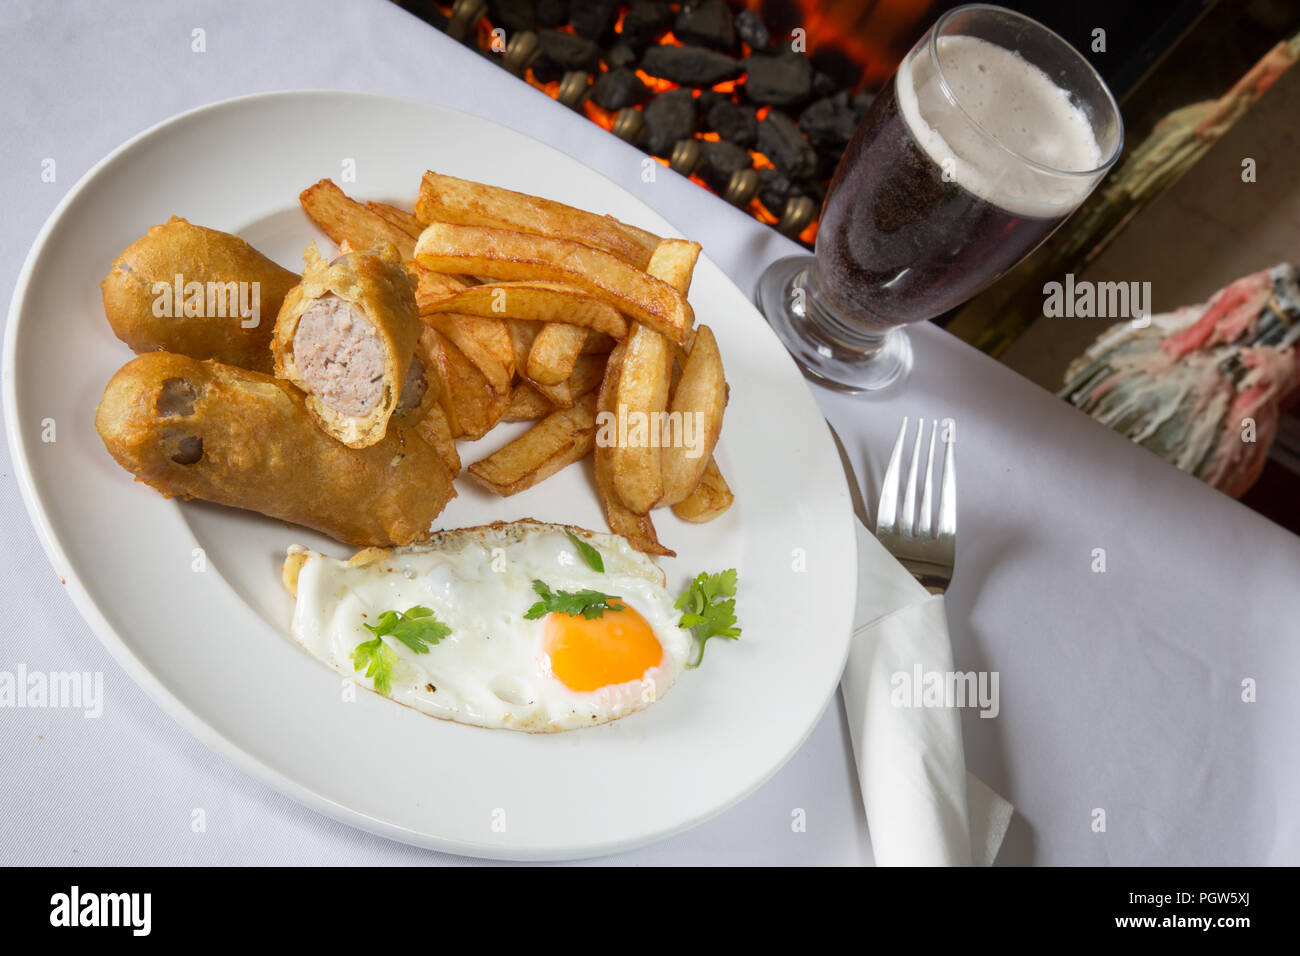 Traditional English supper of deep fried battered sausage with chips/fries and a fried egg Stock Photo